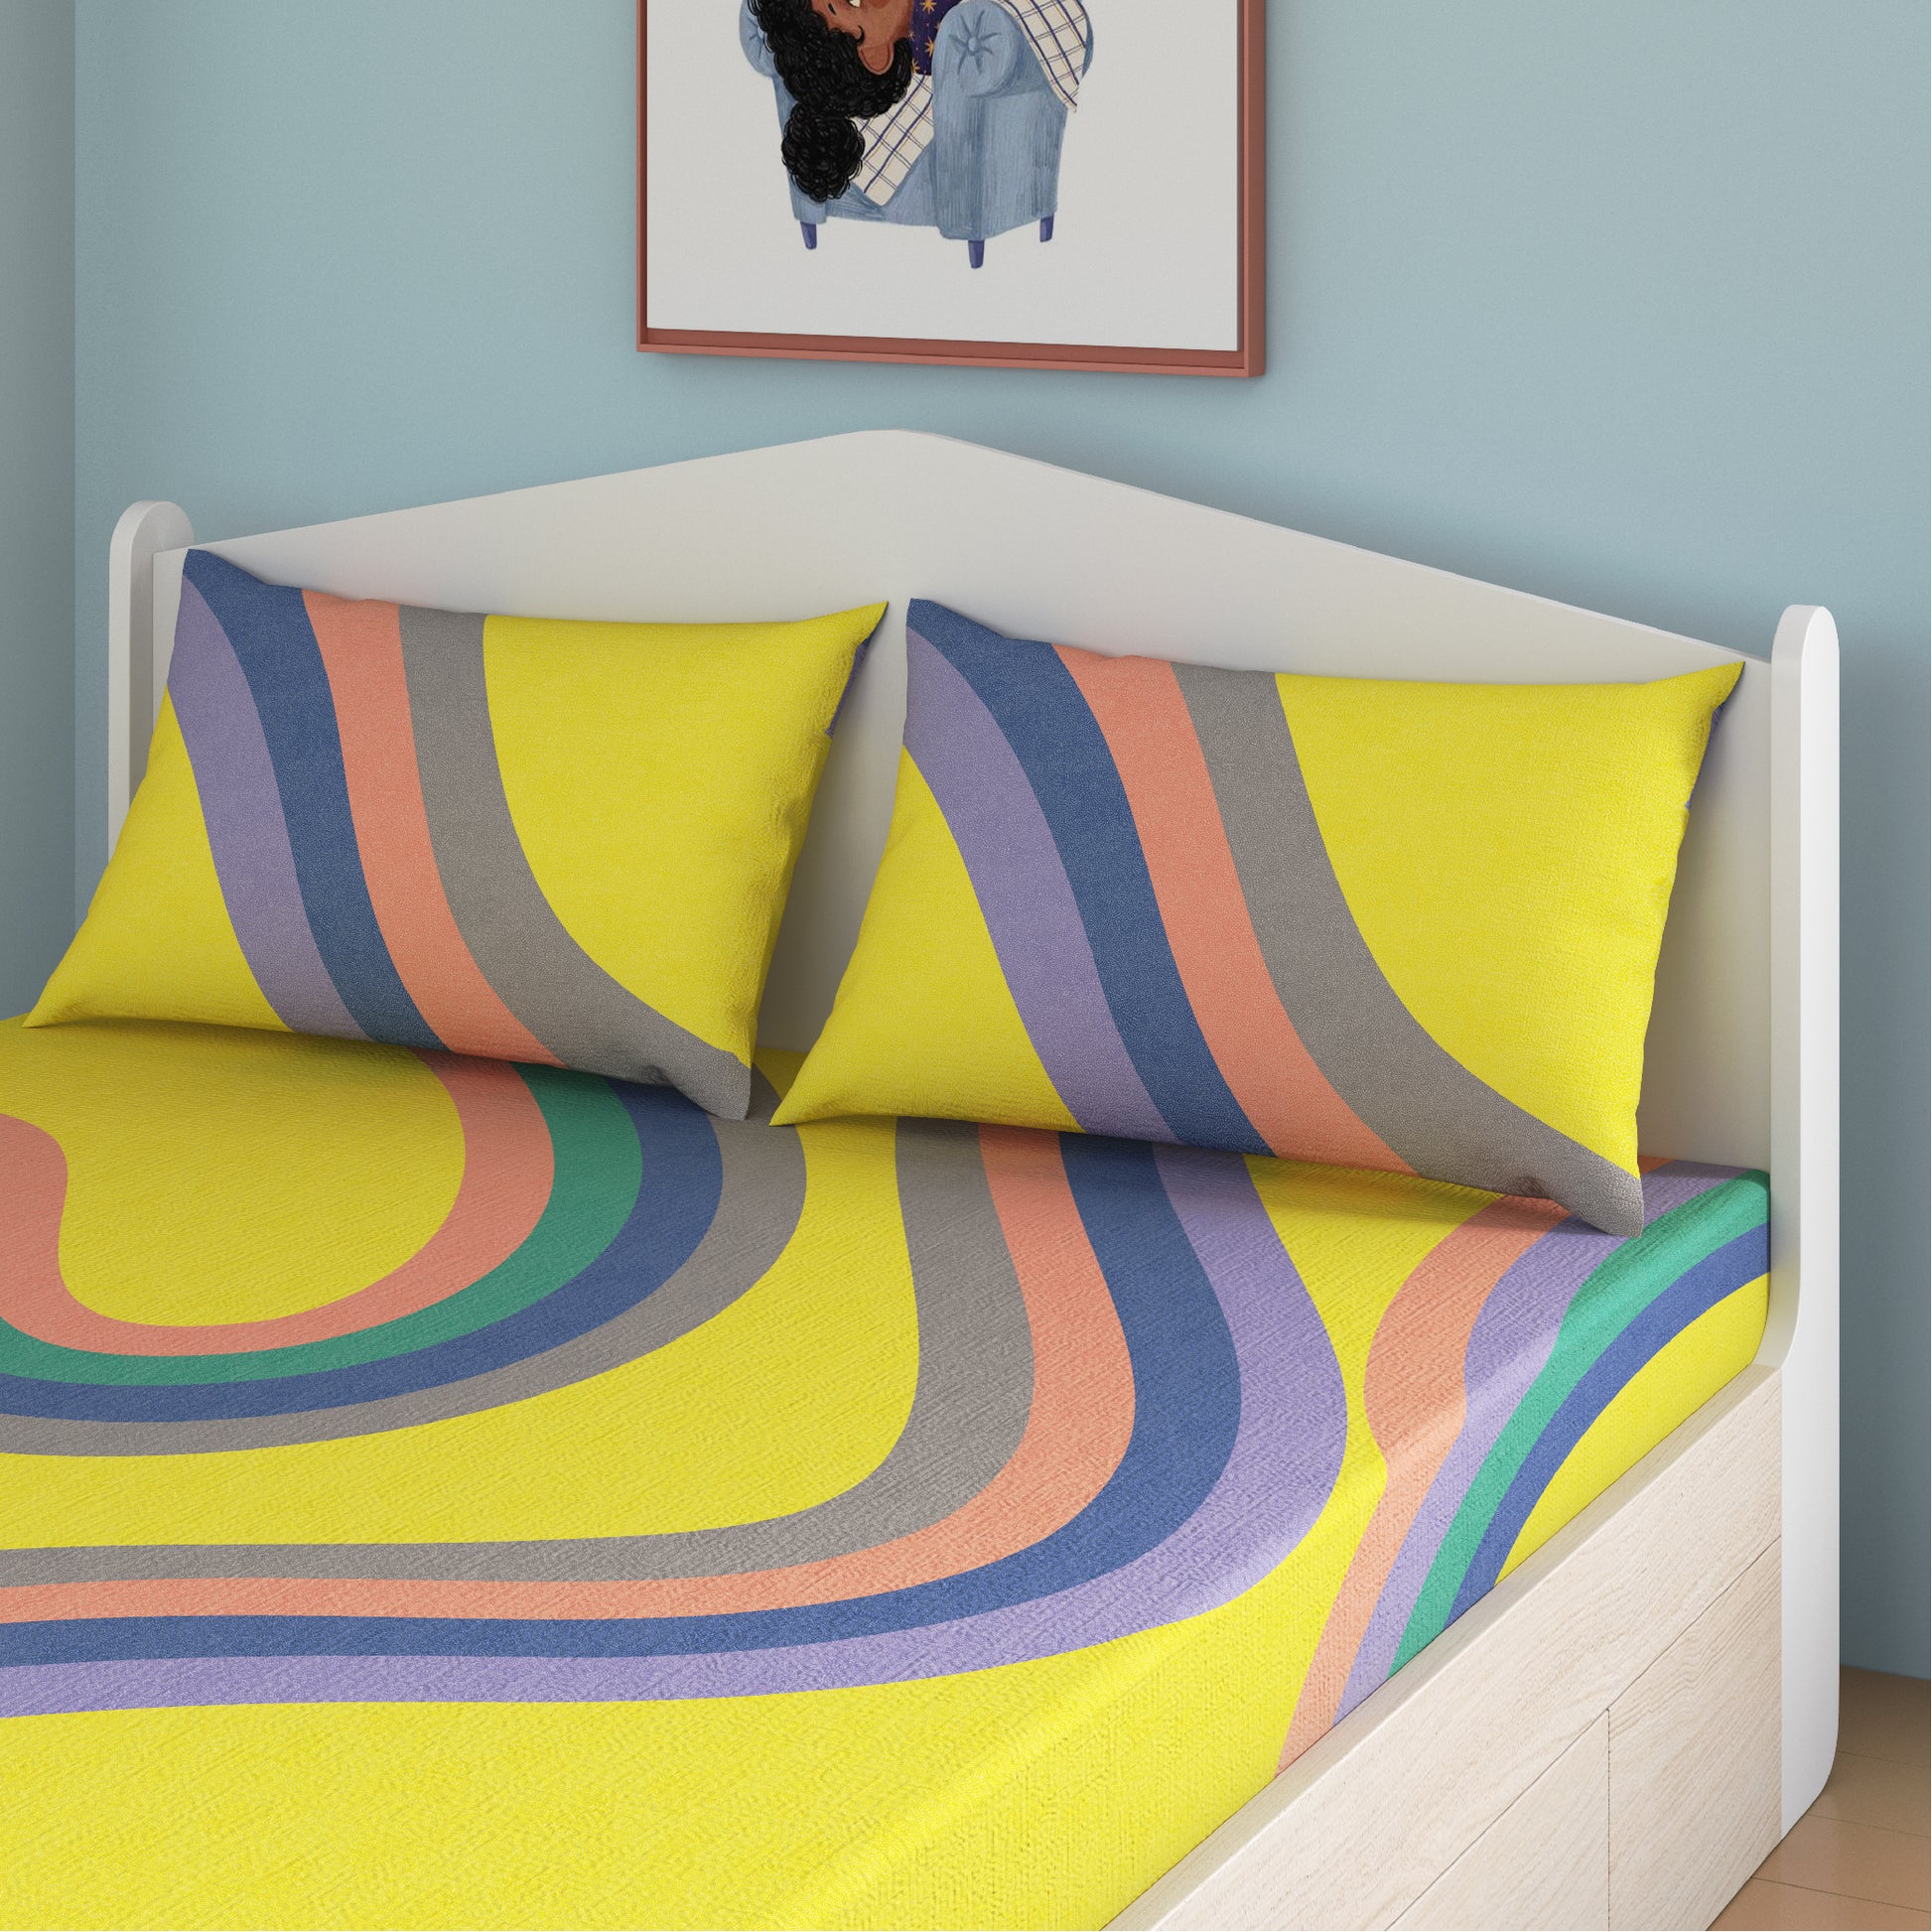 media_gallary Winding Roads Fitted Bedsheet, Queen Size 3